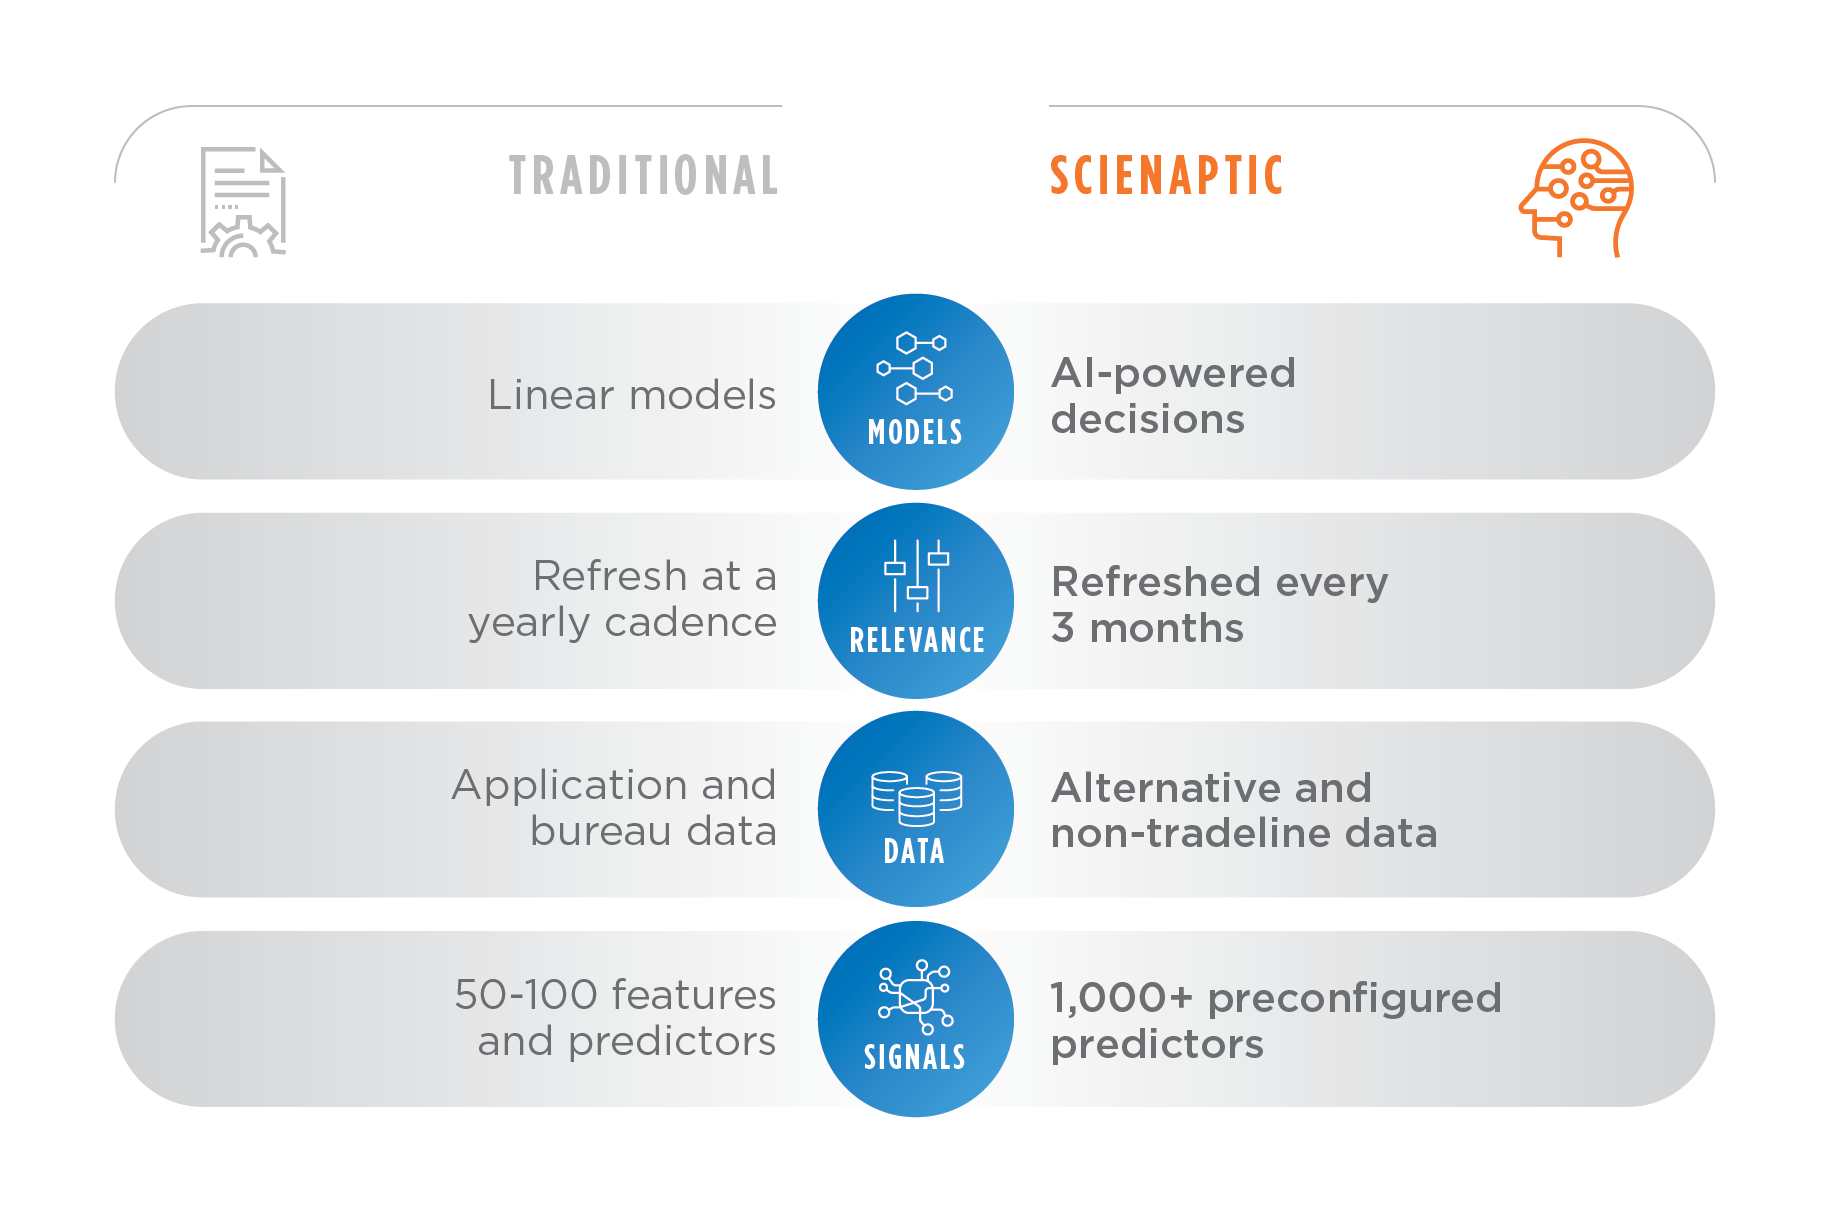 An image showing traditional models vs Scienaptic's model